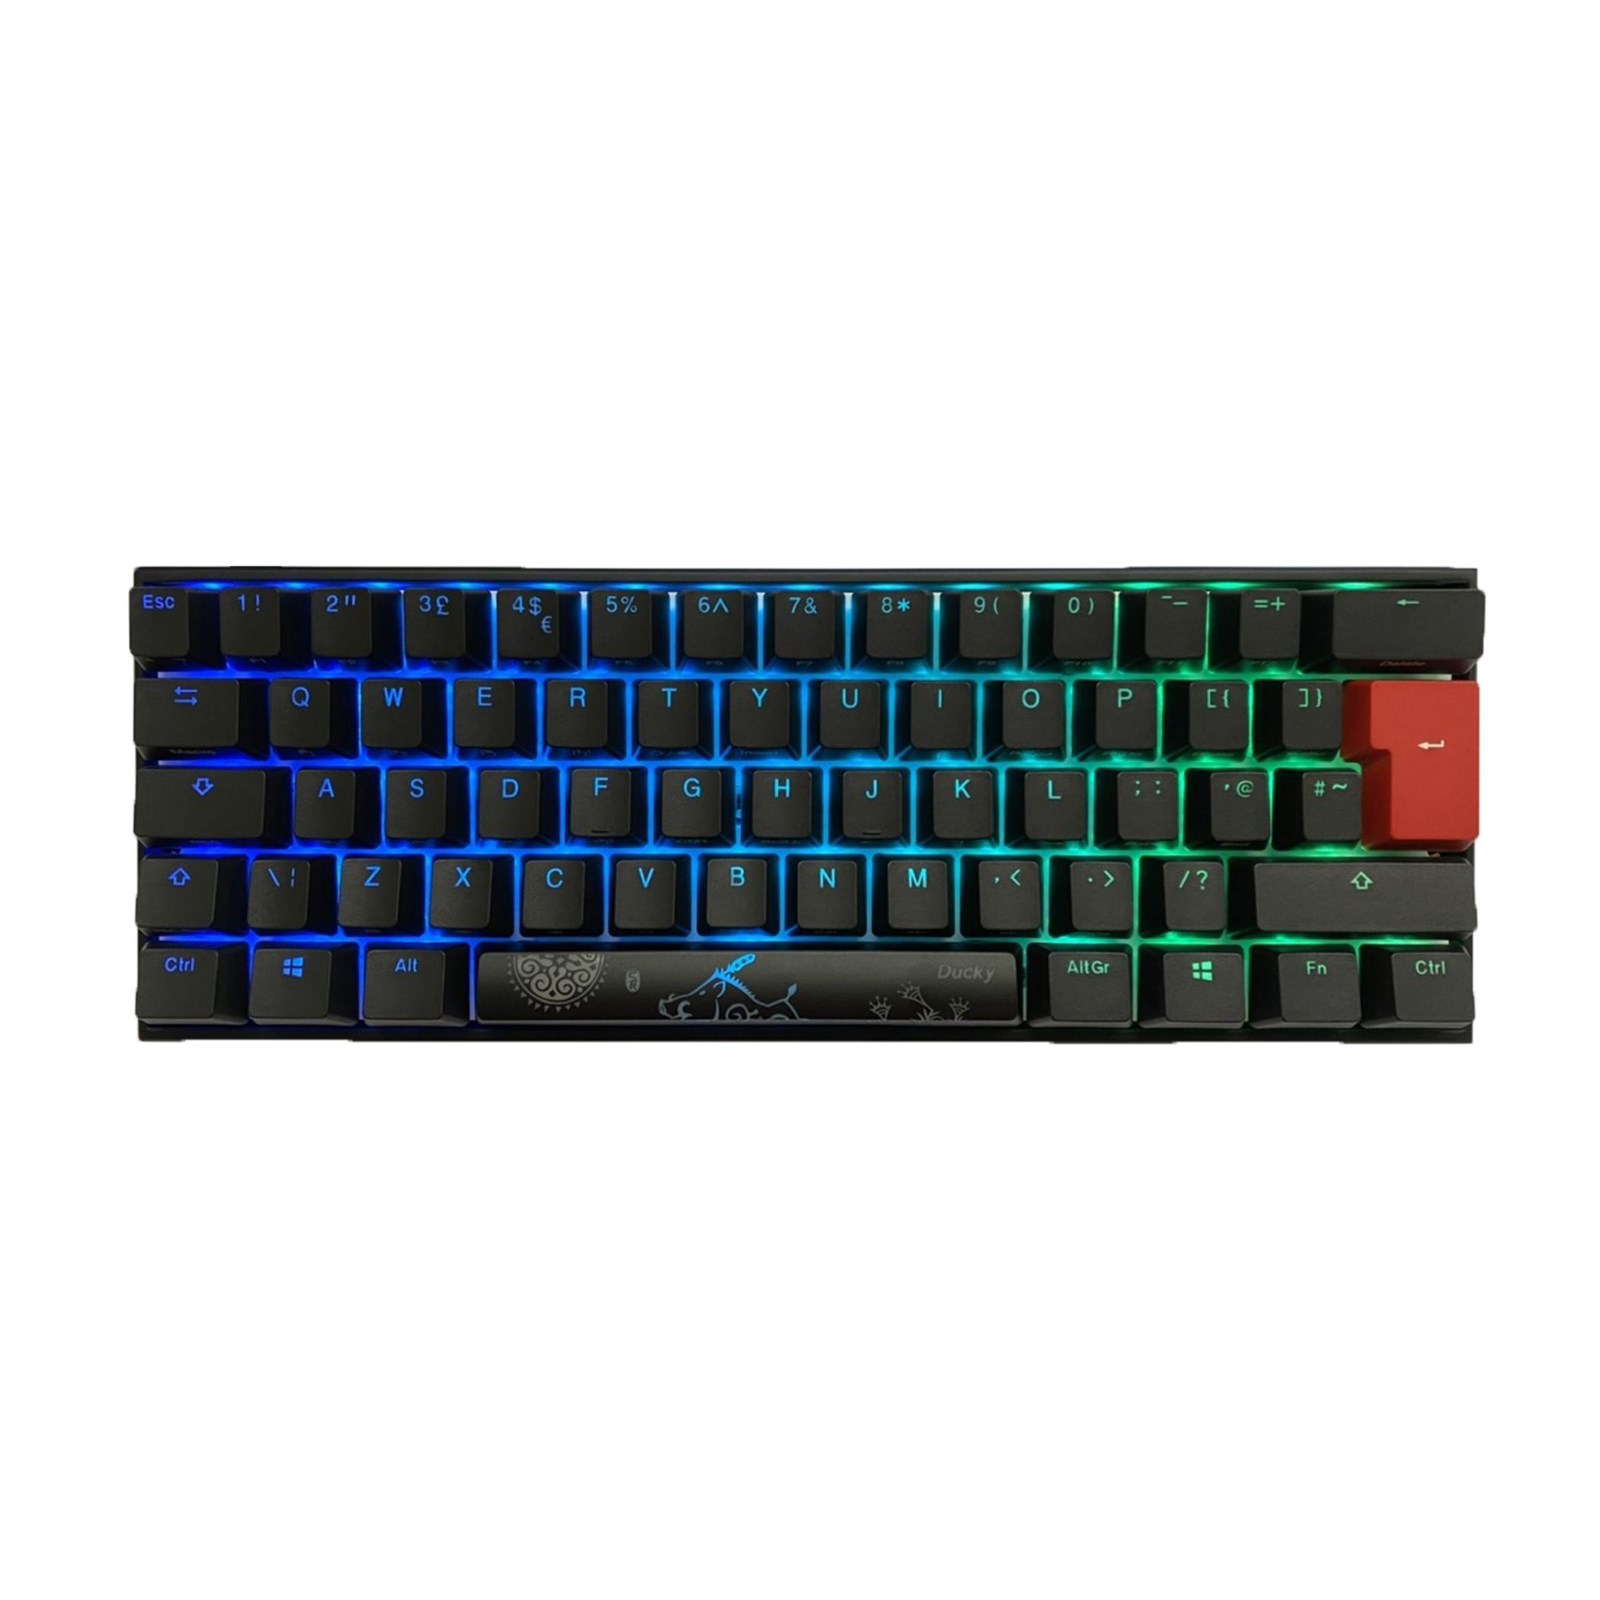 Ducky One 2 Mini Rgb Mechanical Keyboard In Black With Cherry Mx Brown Switches Uk Layout Dkon61st Bukpdazt1 Ccl Computers